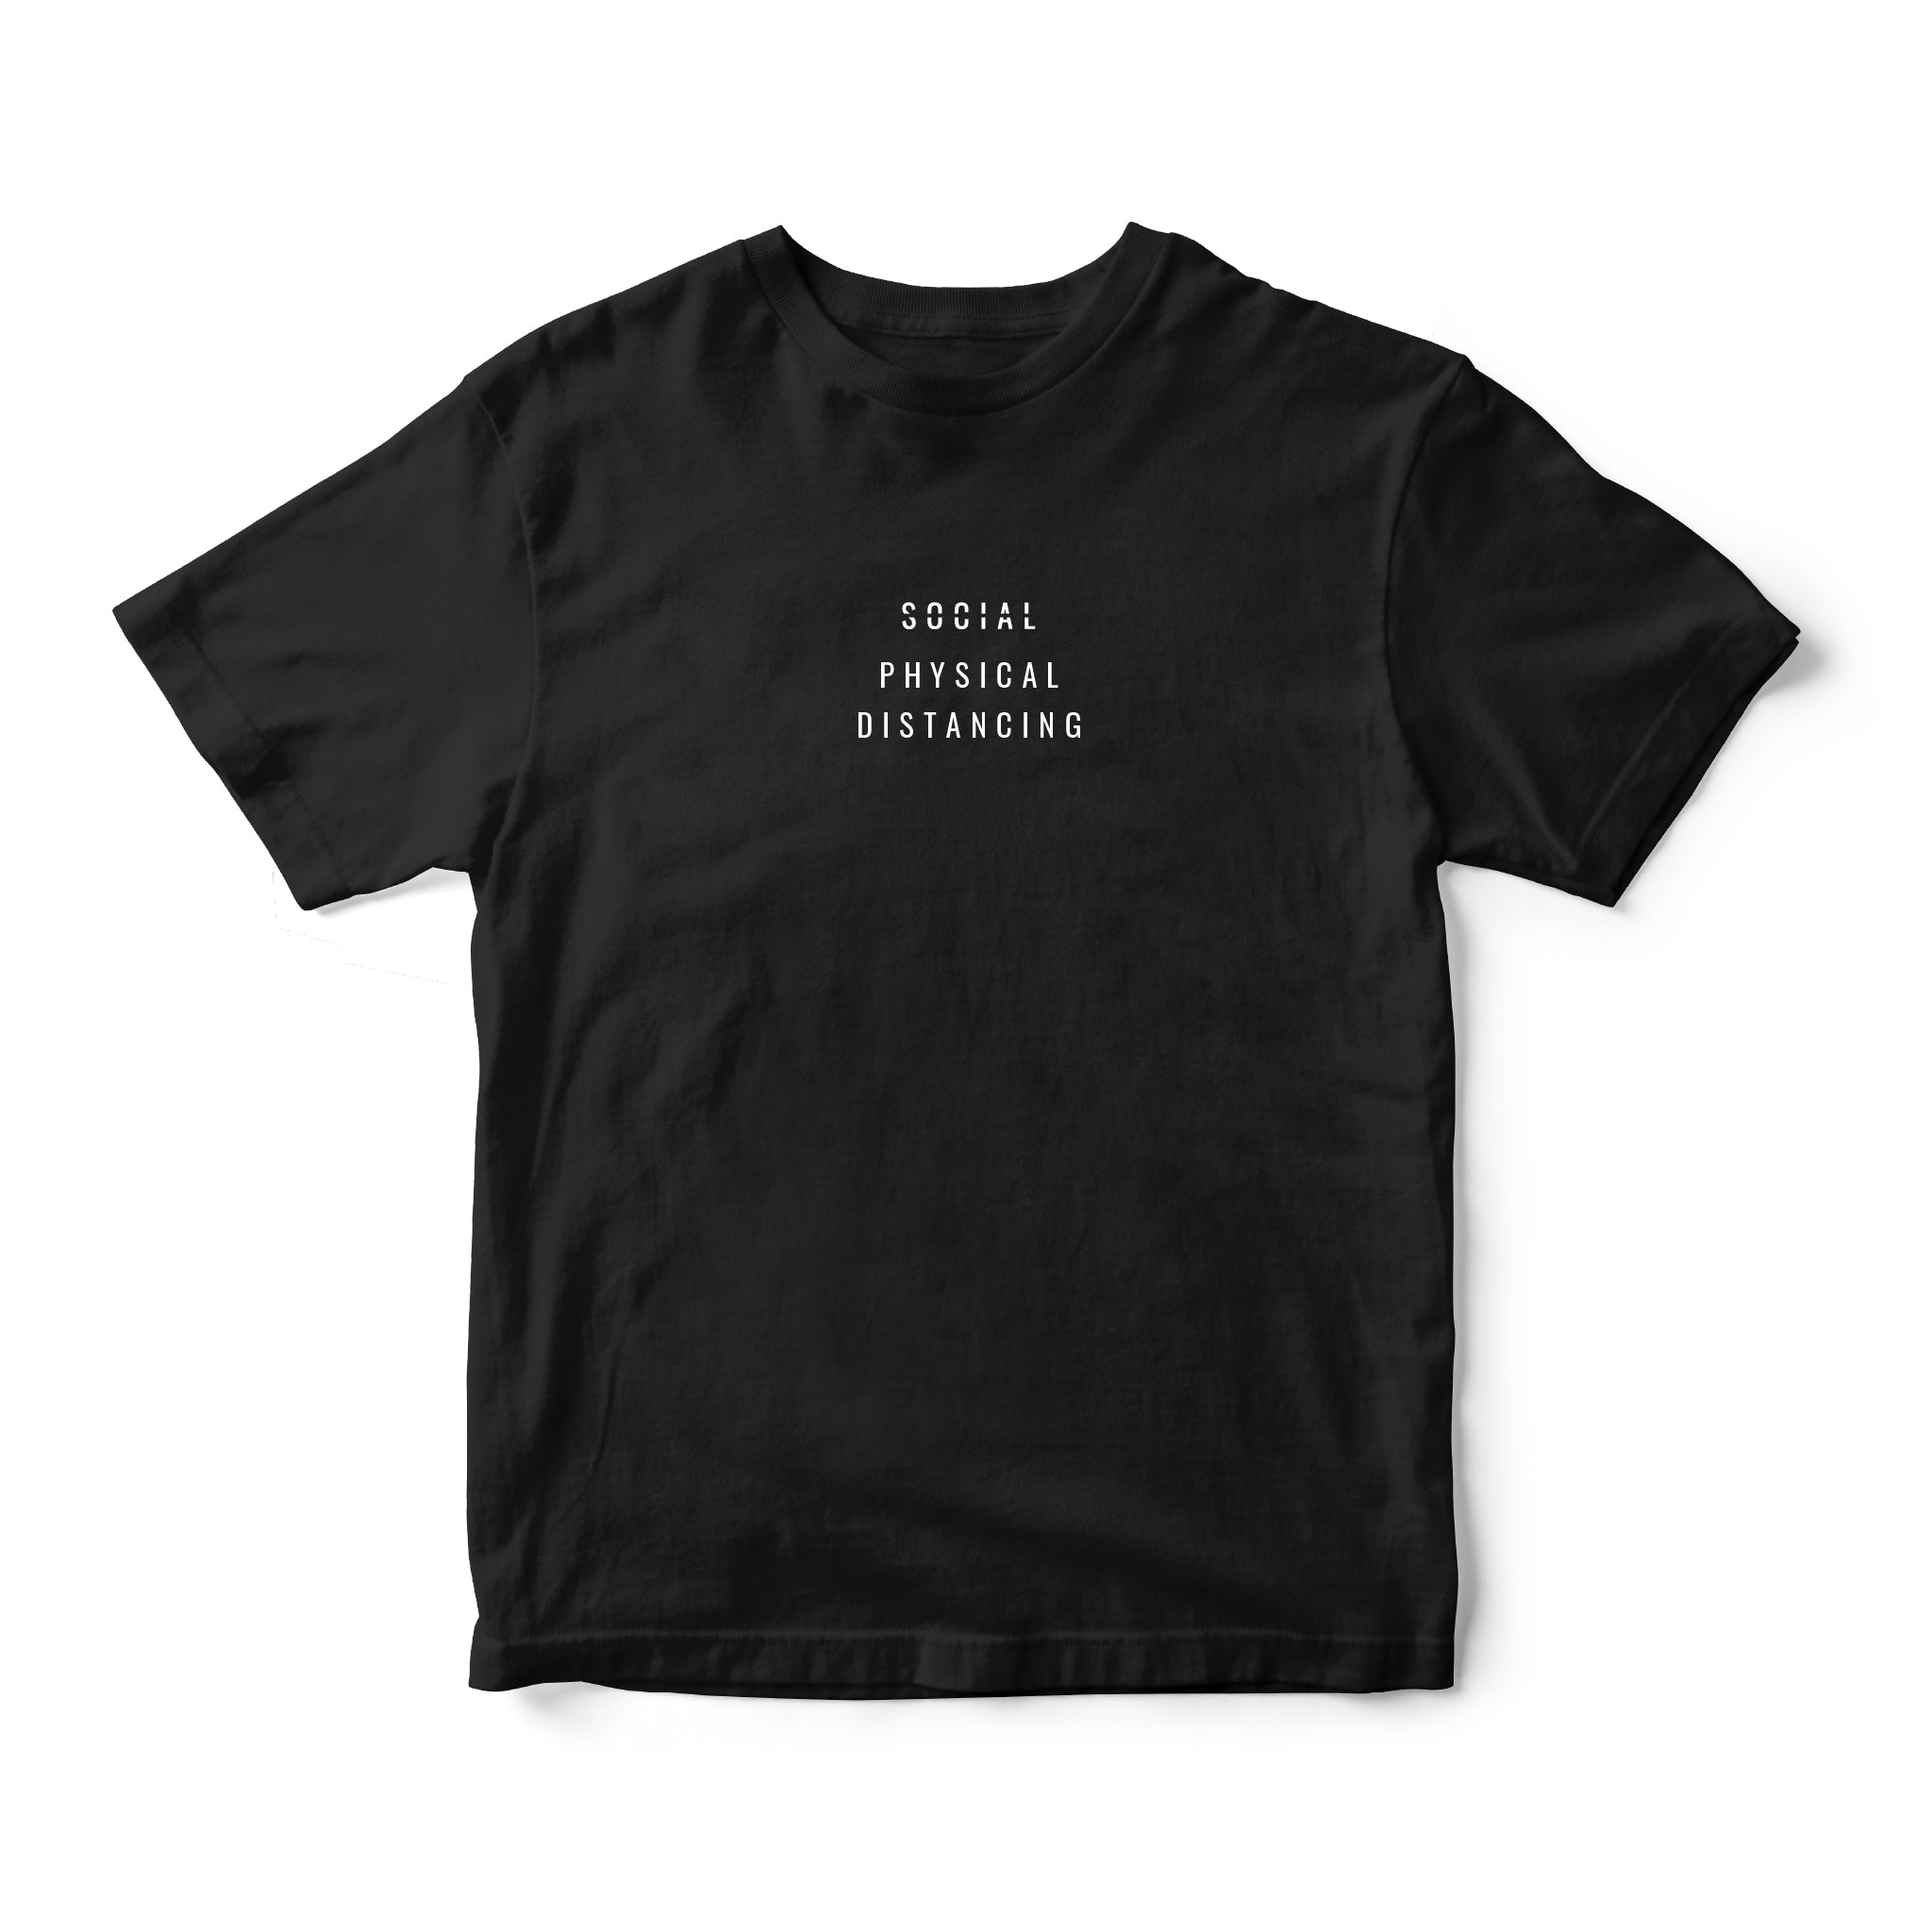 Instee Physical Distancing T-shirt Unisex 100% Cotton